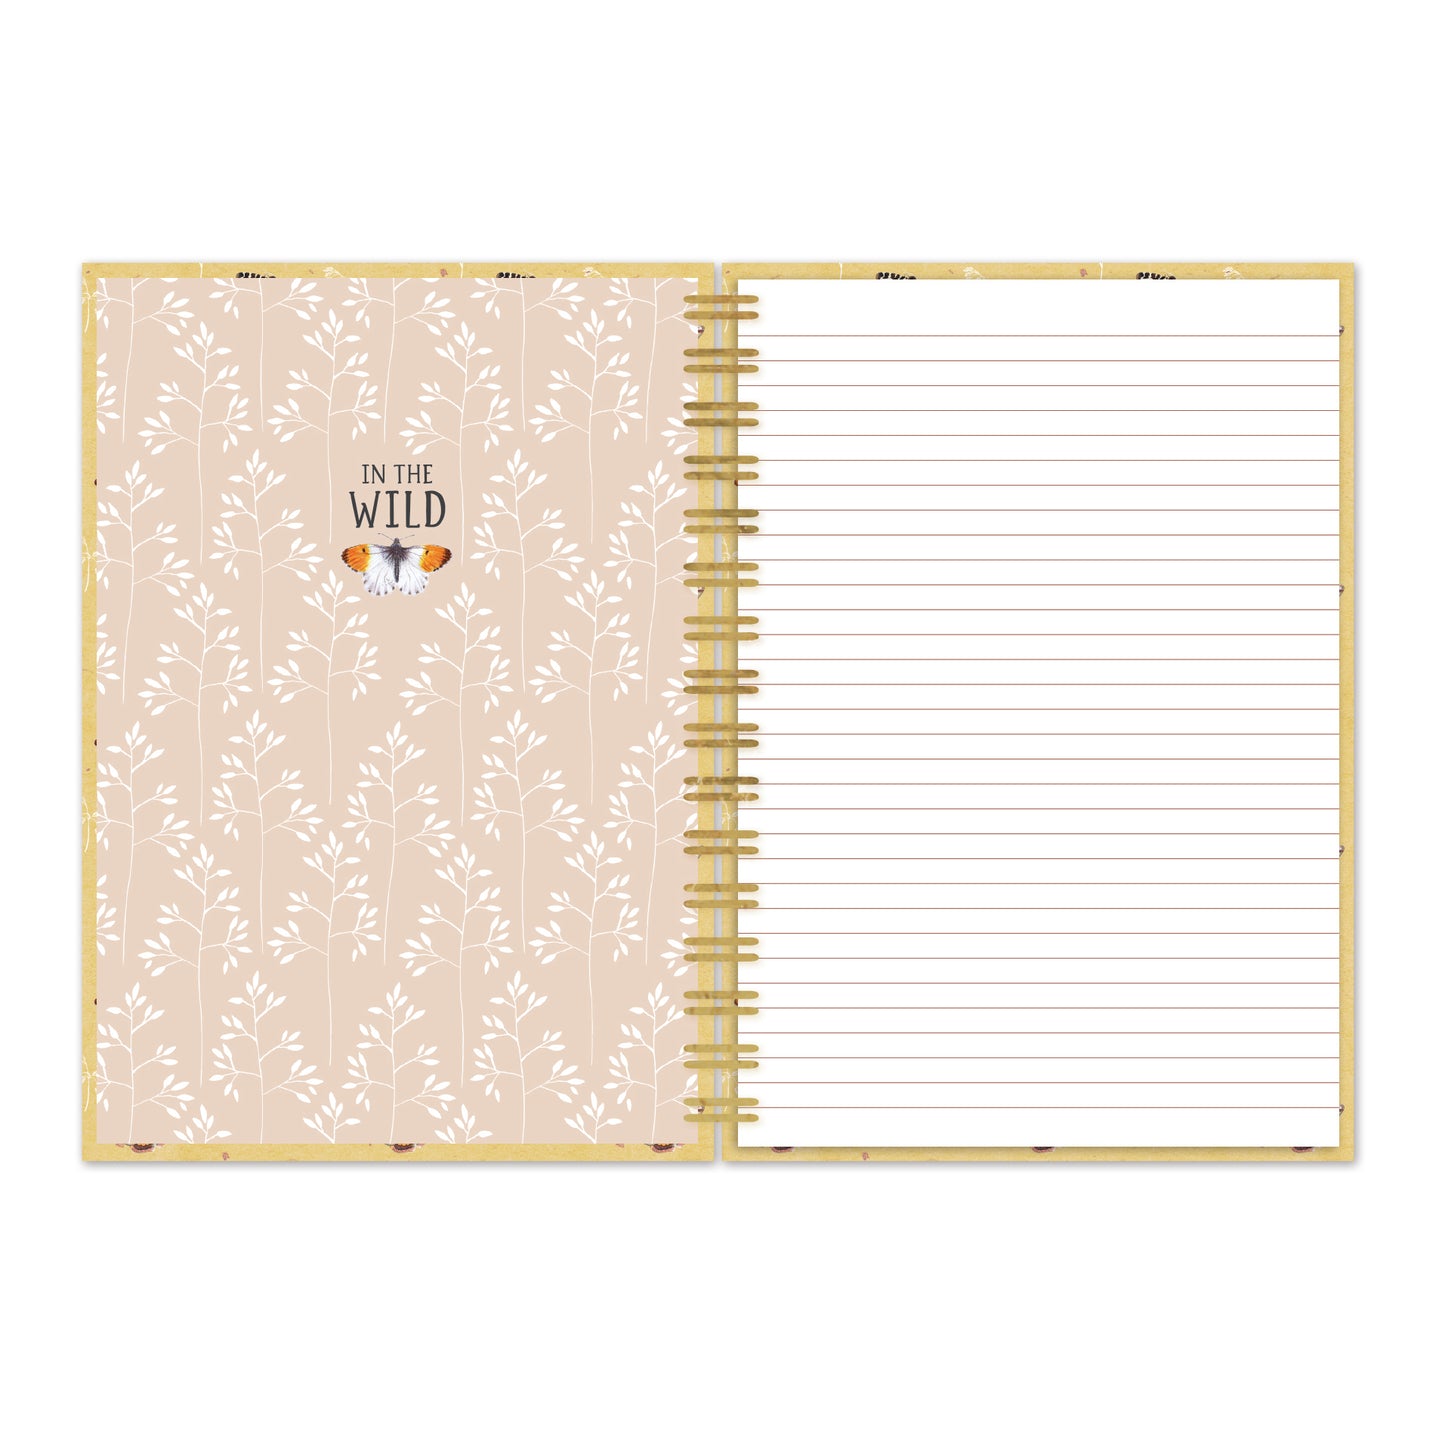 RSPB - In The Wild Stationery - Hardcover Notebook (A5 - Wiro)